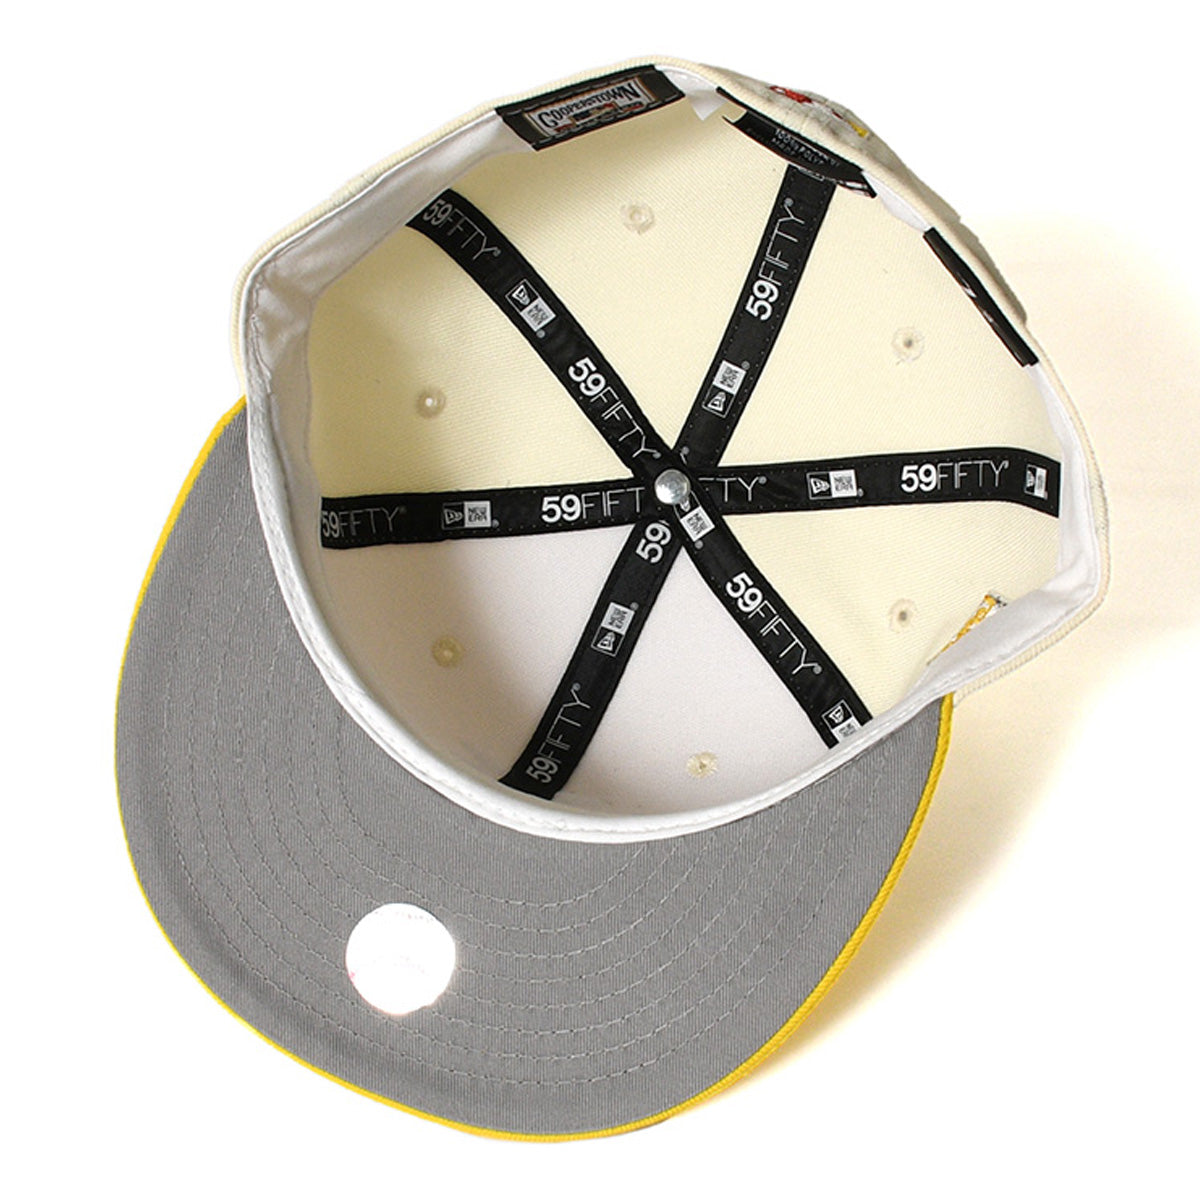 NEW ERA 紐約大都會隊 - 59FIFTY 1969 LETS GO MTS CHROME/CYBER YELLOW